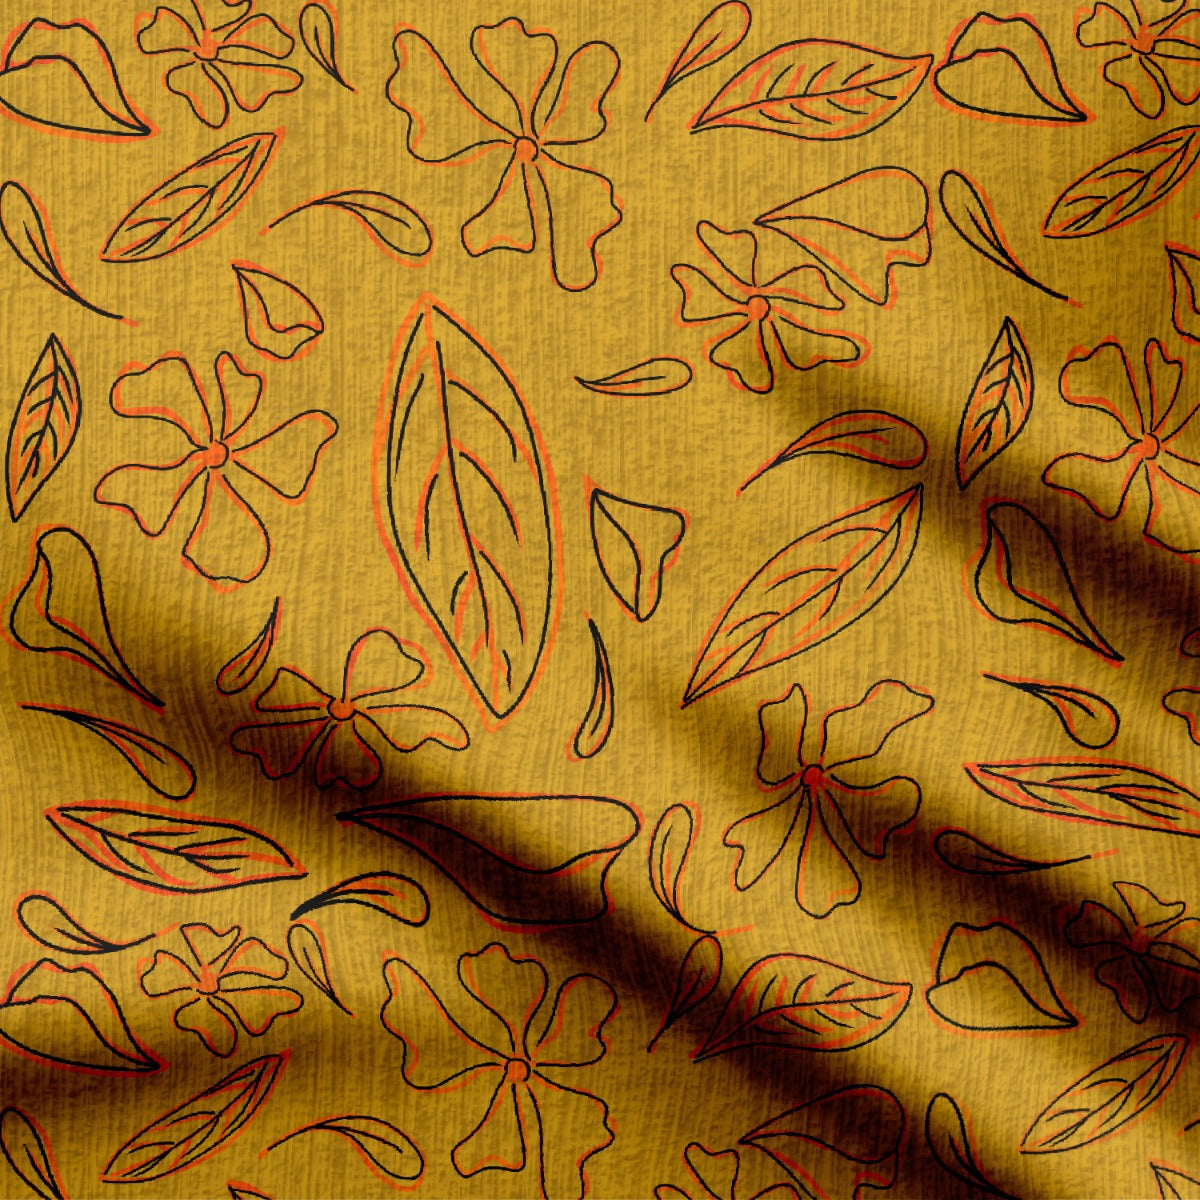 Floral All Over Me Yellow-461933, All Designs, Chinnon Chiffon, cotton, Cotton Canvas, Cotton Poplin, Cotton Satin, Crepe, FEATURED ARTIST DESIGNS, Gandharvi Guha, Giza Cotton, Indian, Leaf, Light Chiffon, Modal Satin, Muslin, Natural Crepe, Organic Cotton Bamboo, Organza, Organza Satin, Organza Satin (Polyester), pashmina, Poly Canvas, Poly Cotton, Pure Linen, Rayon, Satin, Satin Linen, Tropical, Velvet Velure, Viscose Dola Silk, Viscose Georgette-Symplico